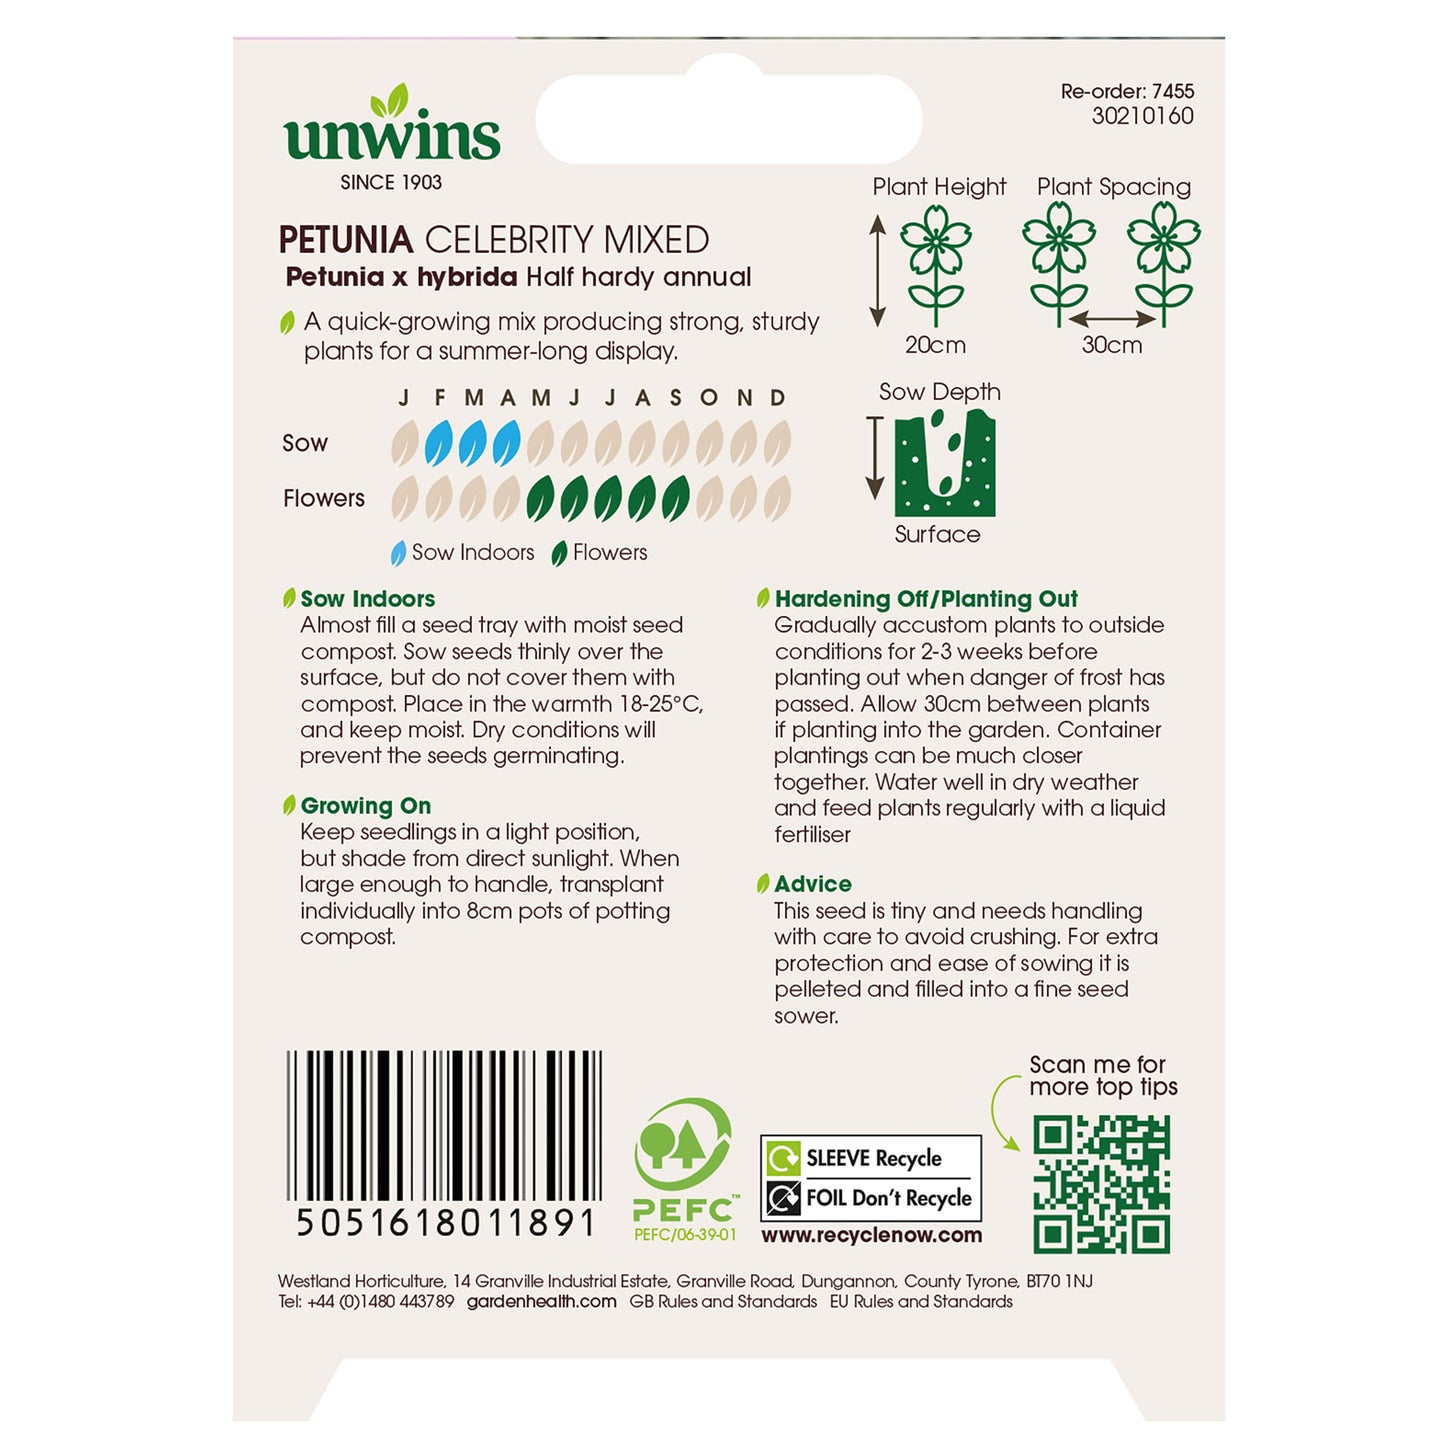 Unwins Petunia Celebrity Mixed Seeds back of pack